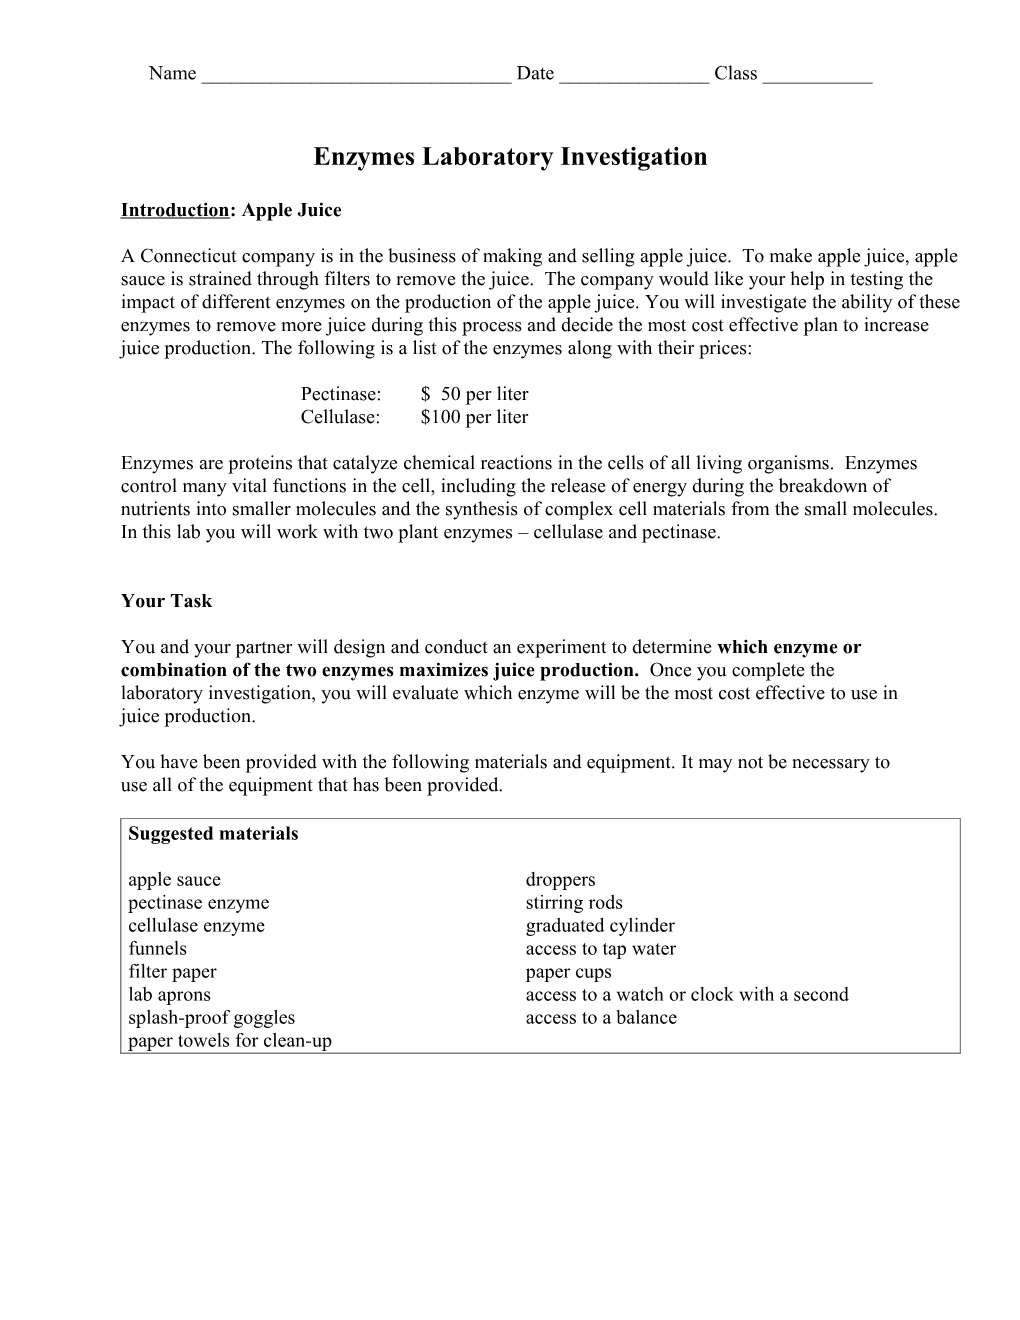 Enzymes Laboratory Investigation